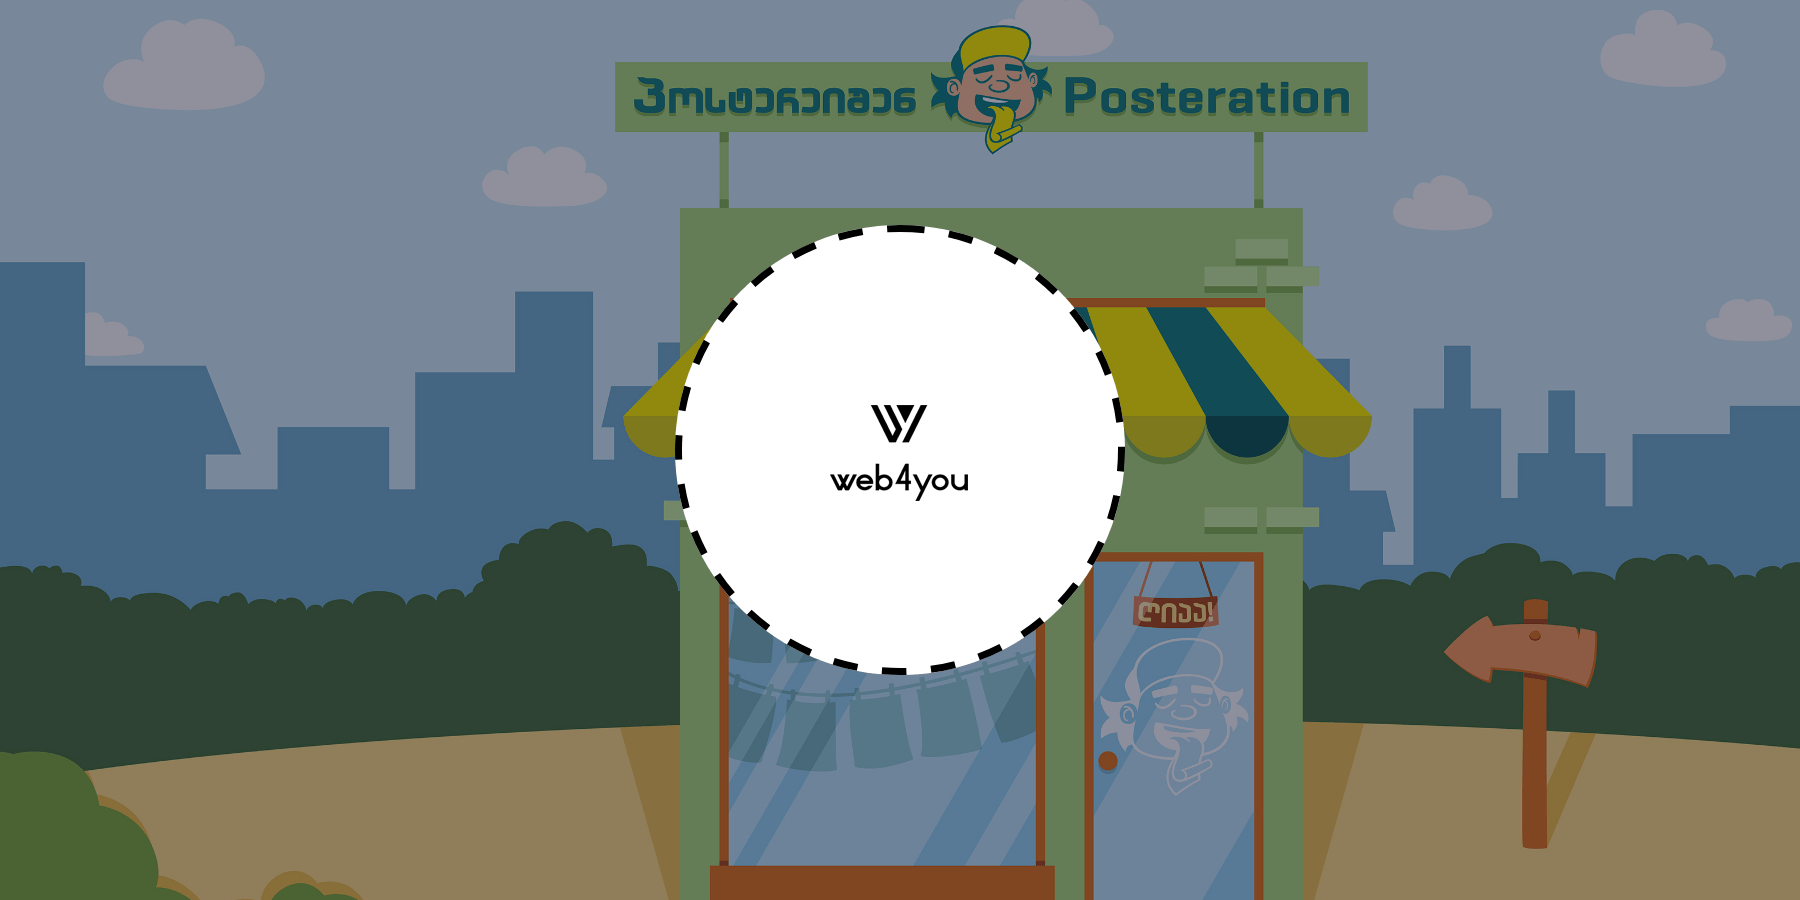 Posteration.ge